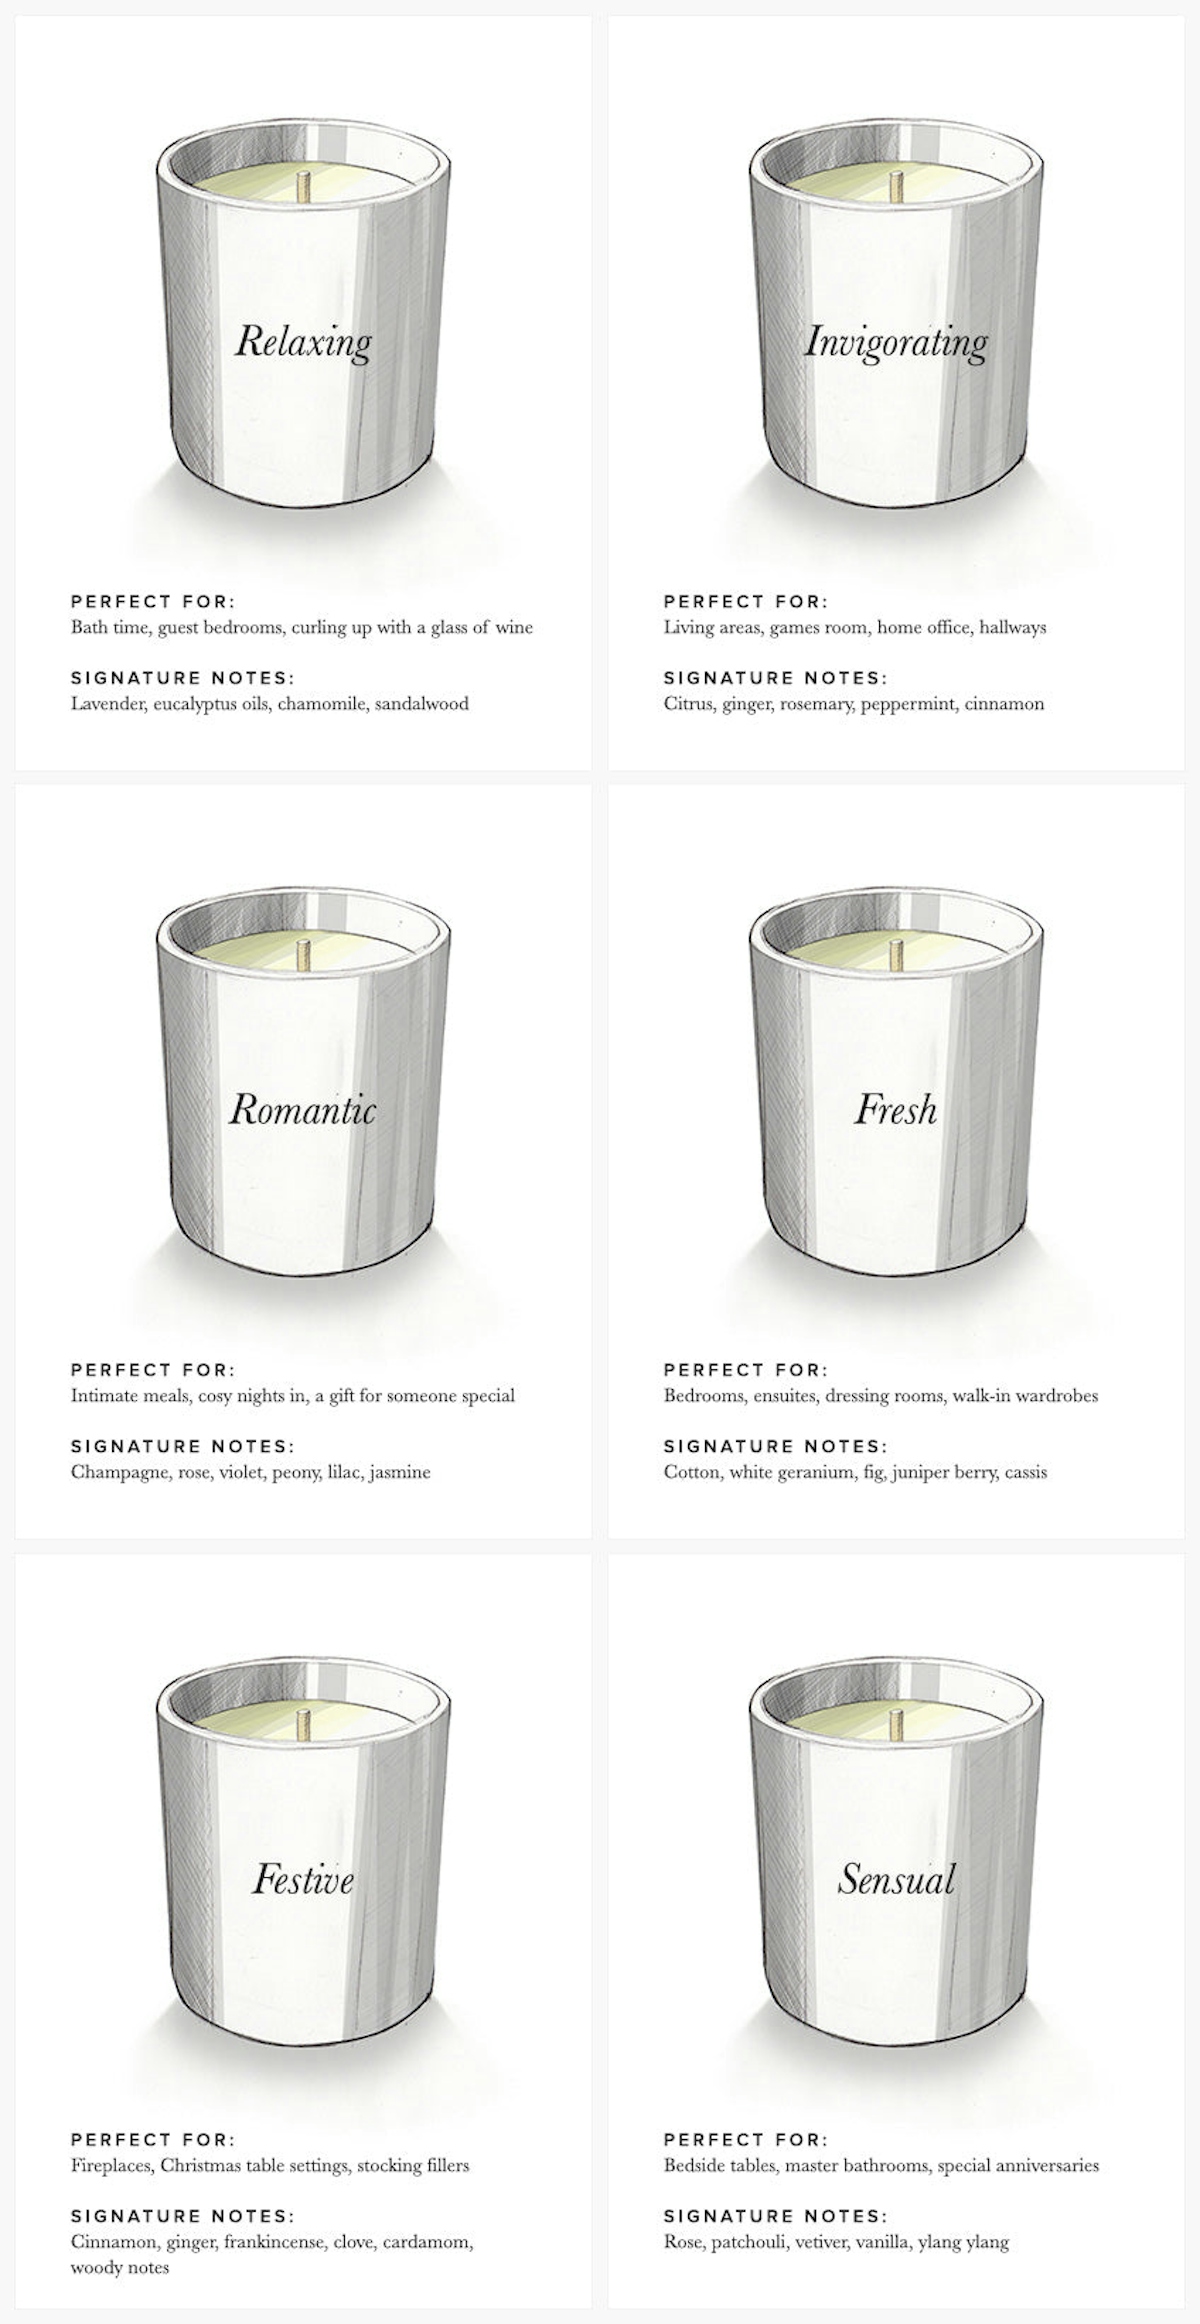 Candle Buying Guide: Choosing Scents, Styles & Wax Types - LuxDeco Style Guide